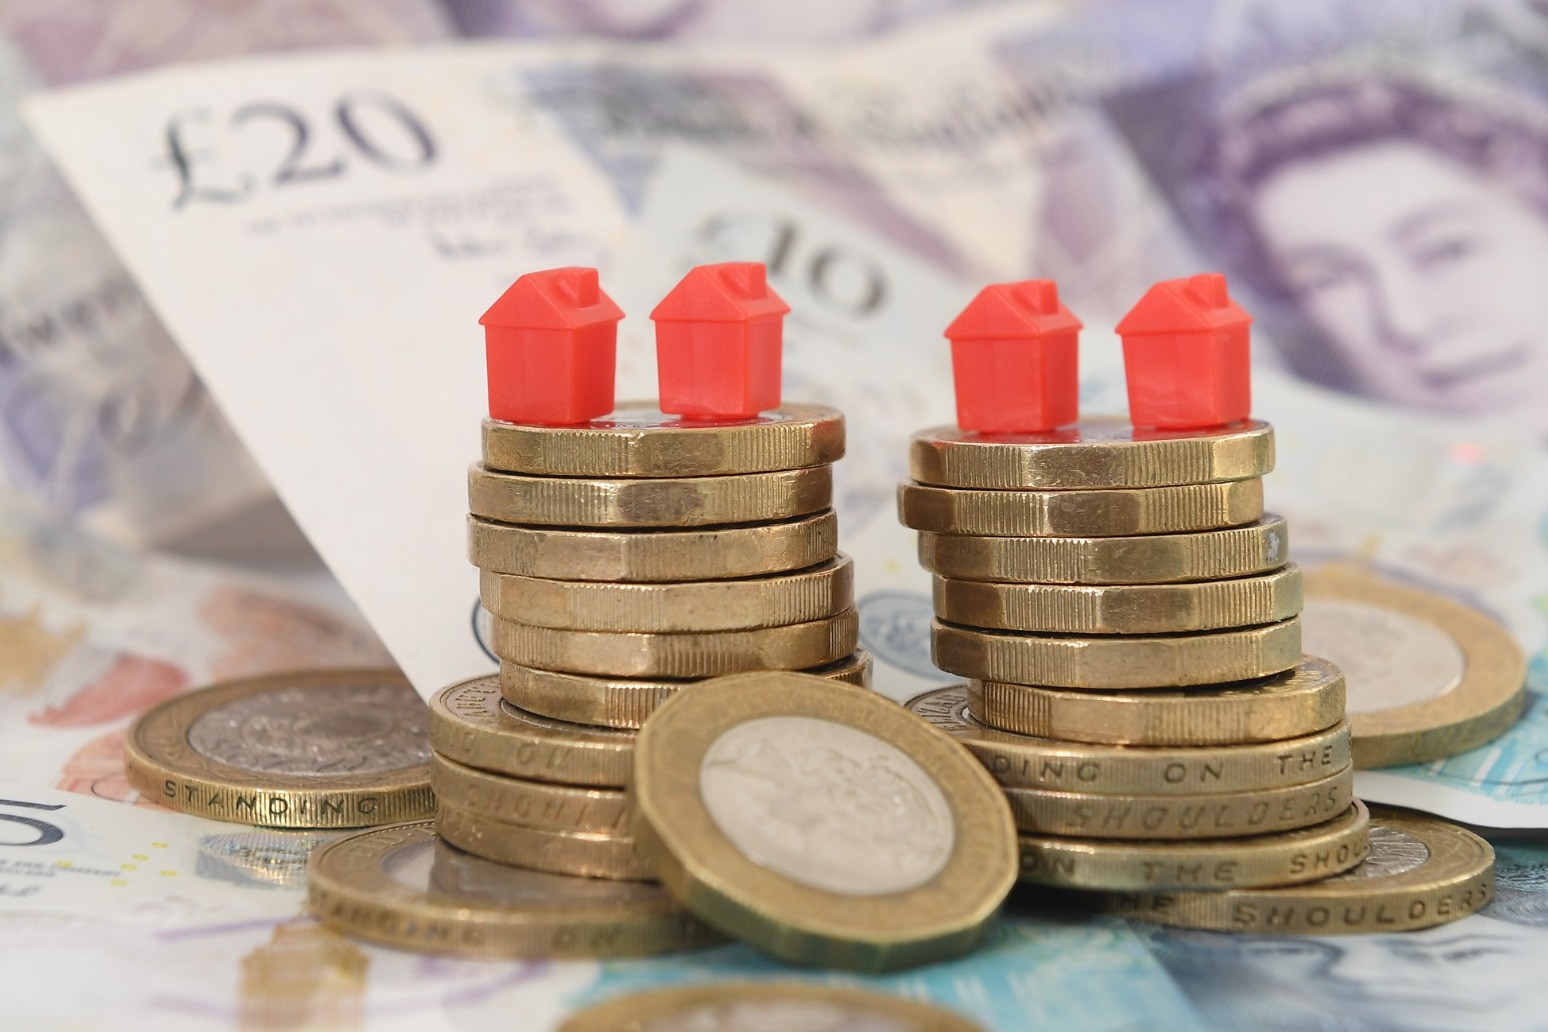 £18,000 typically ‘shaved off’ asking prices to achieve house sales – Zoopla 